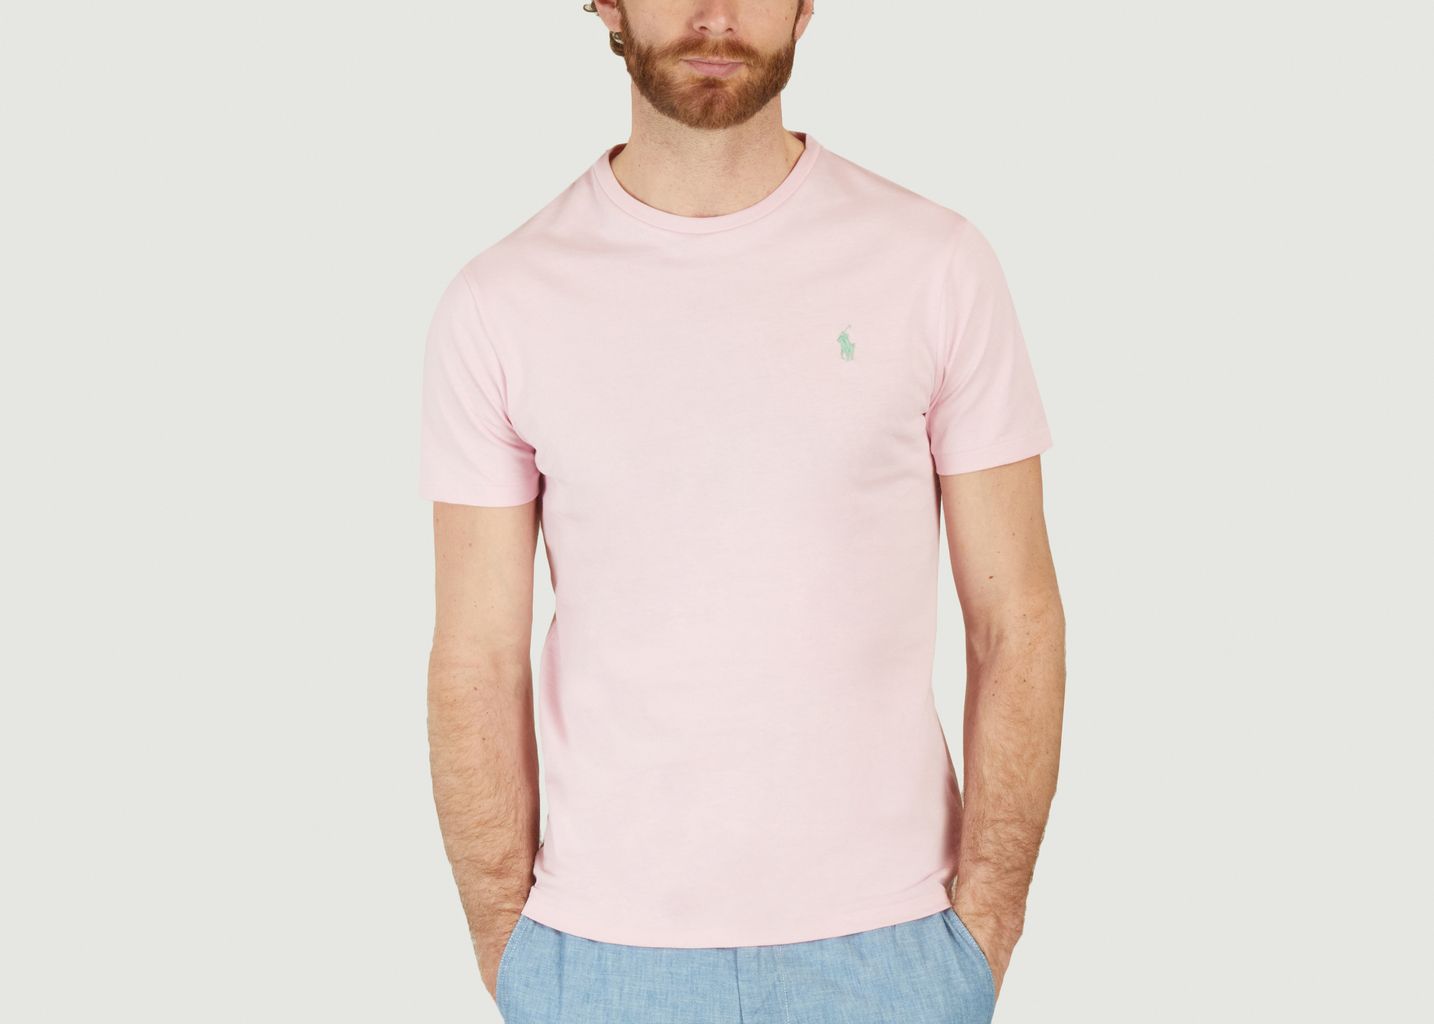 Fitted round-neck jersey T-shirt - Polo Ralph Lauren